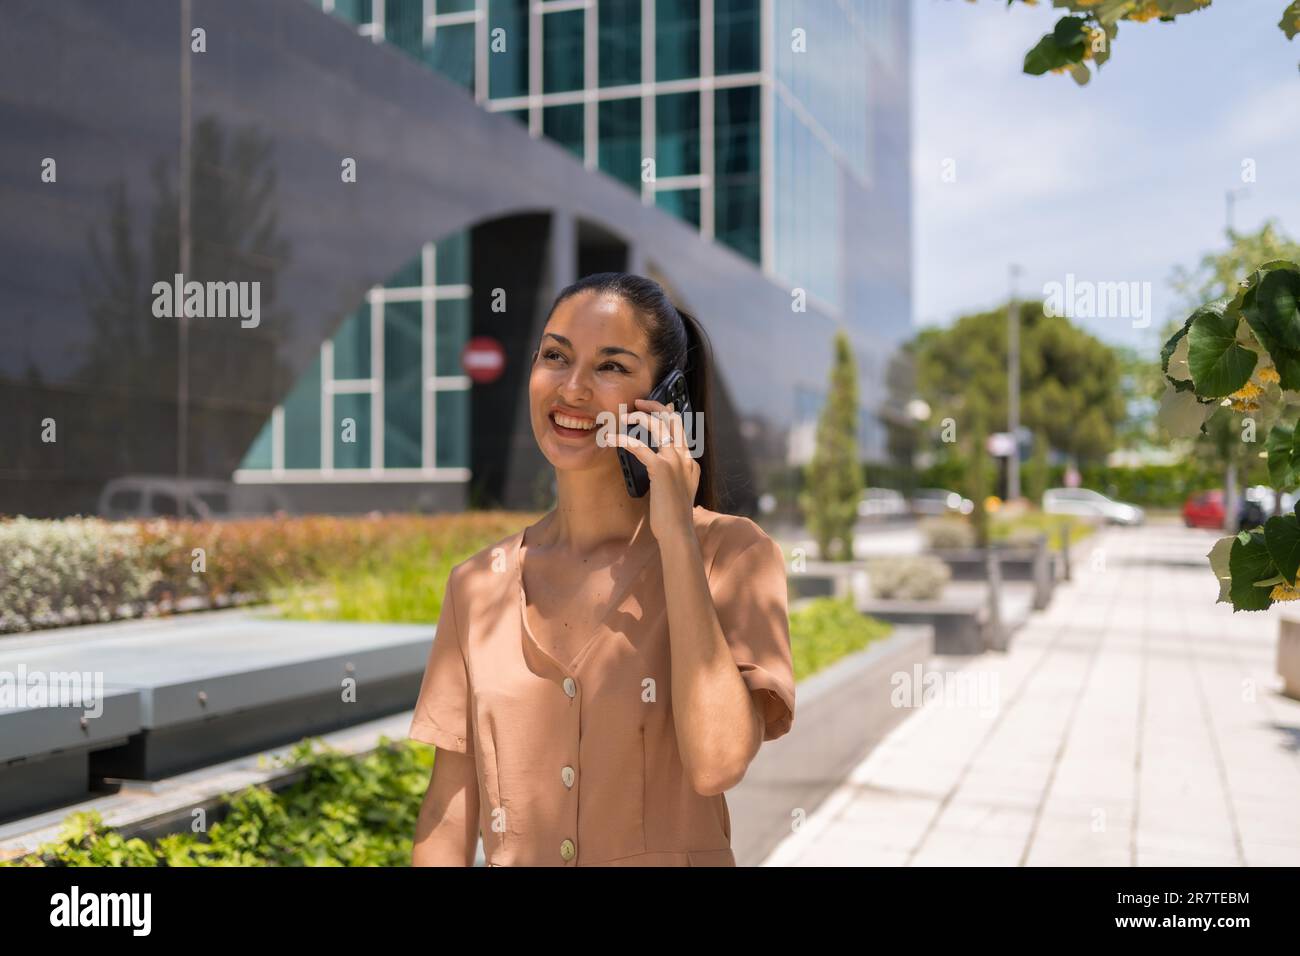 Latin woman executive or businesswoman in a business office area leaving work talking on the phone Stock Photo